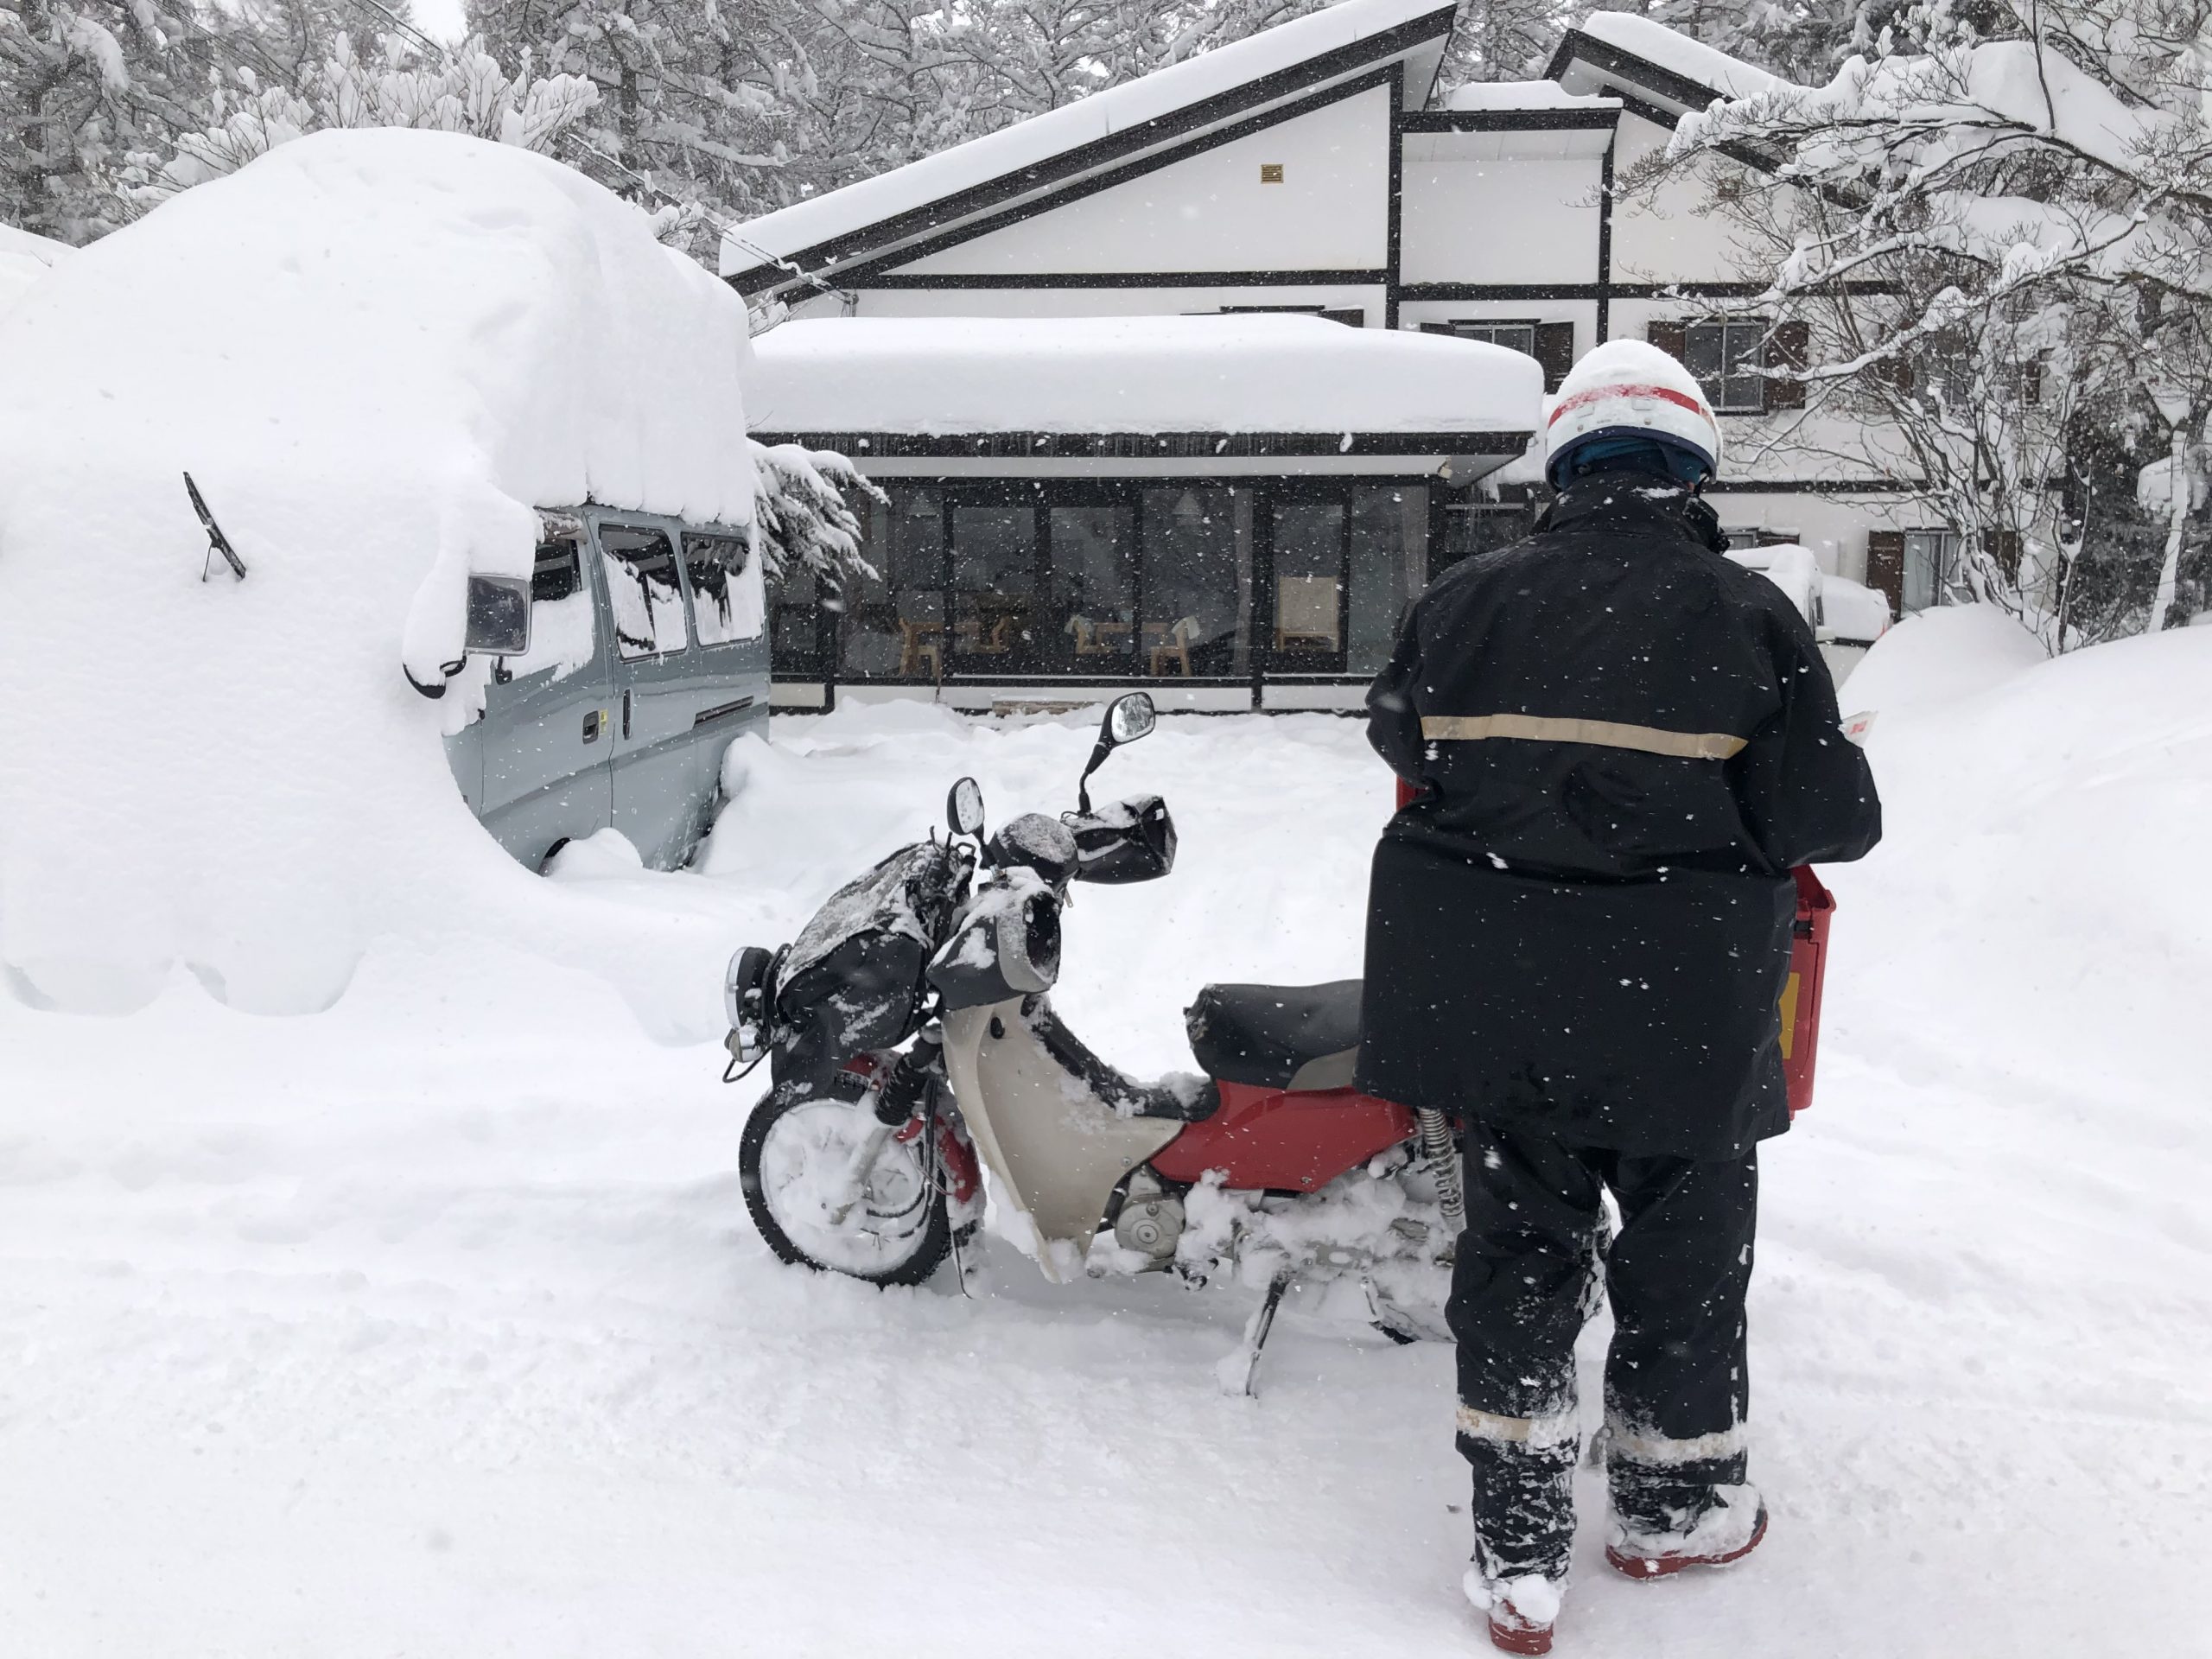 Japan Post Delivering Mail in a Blizzard